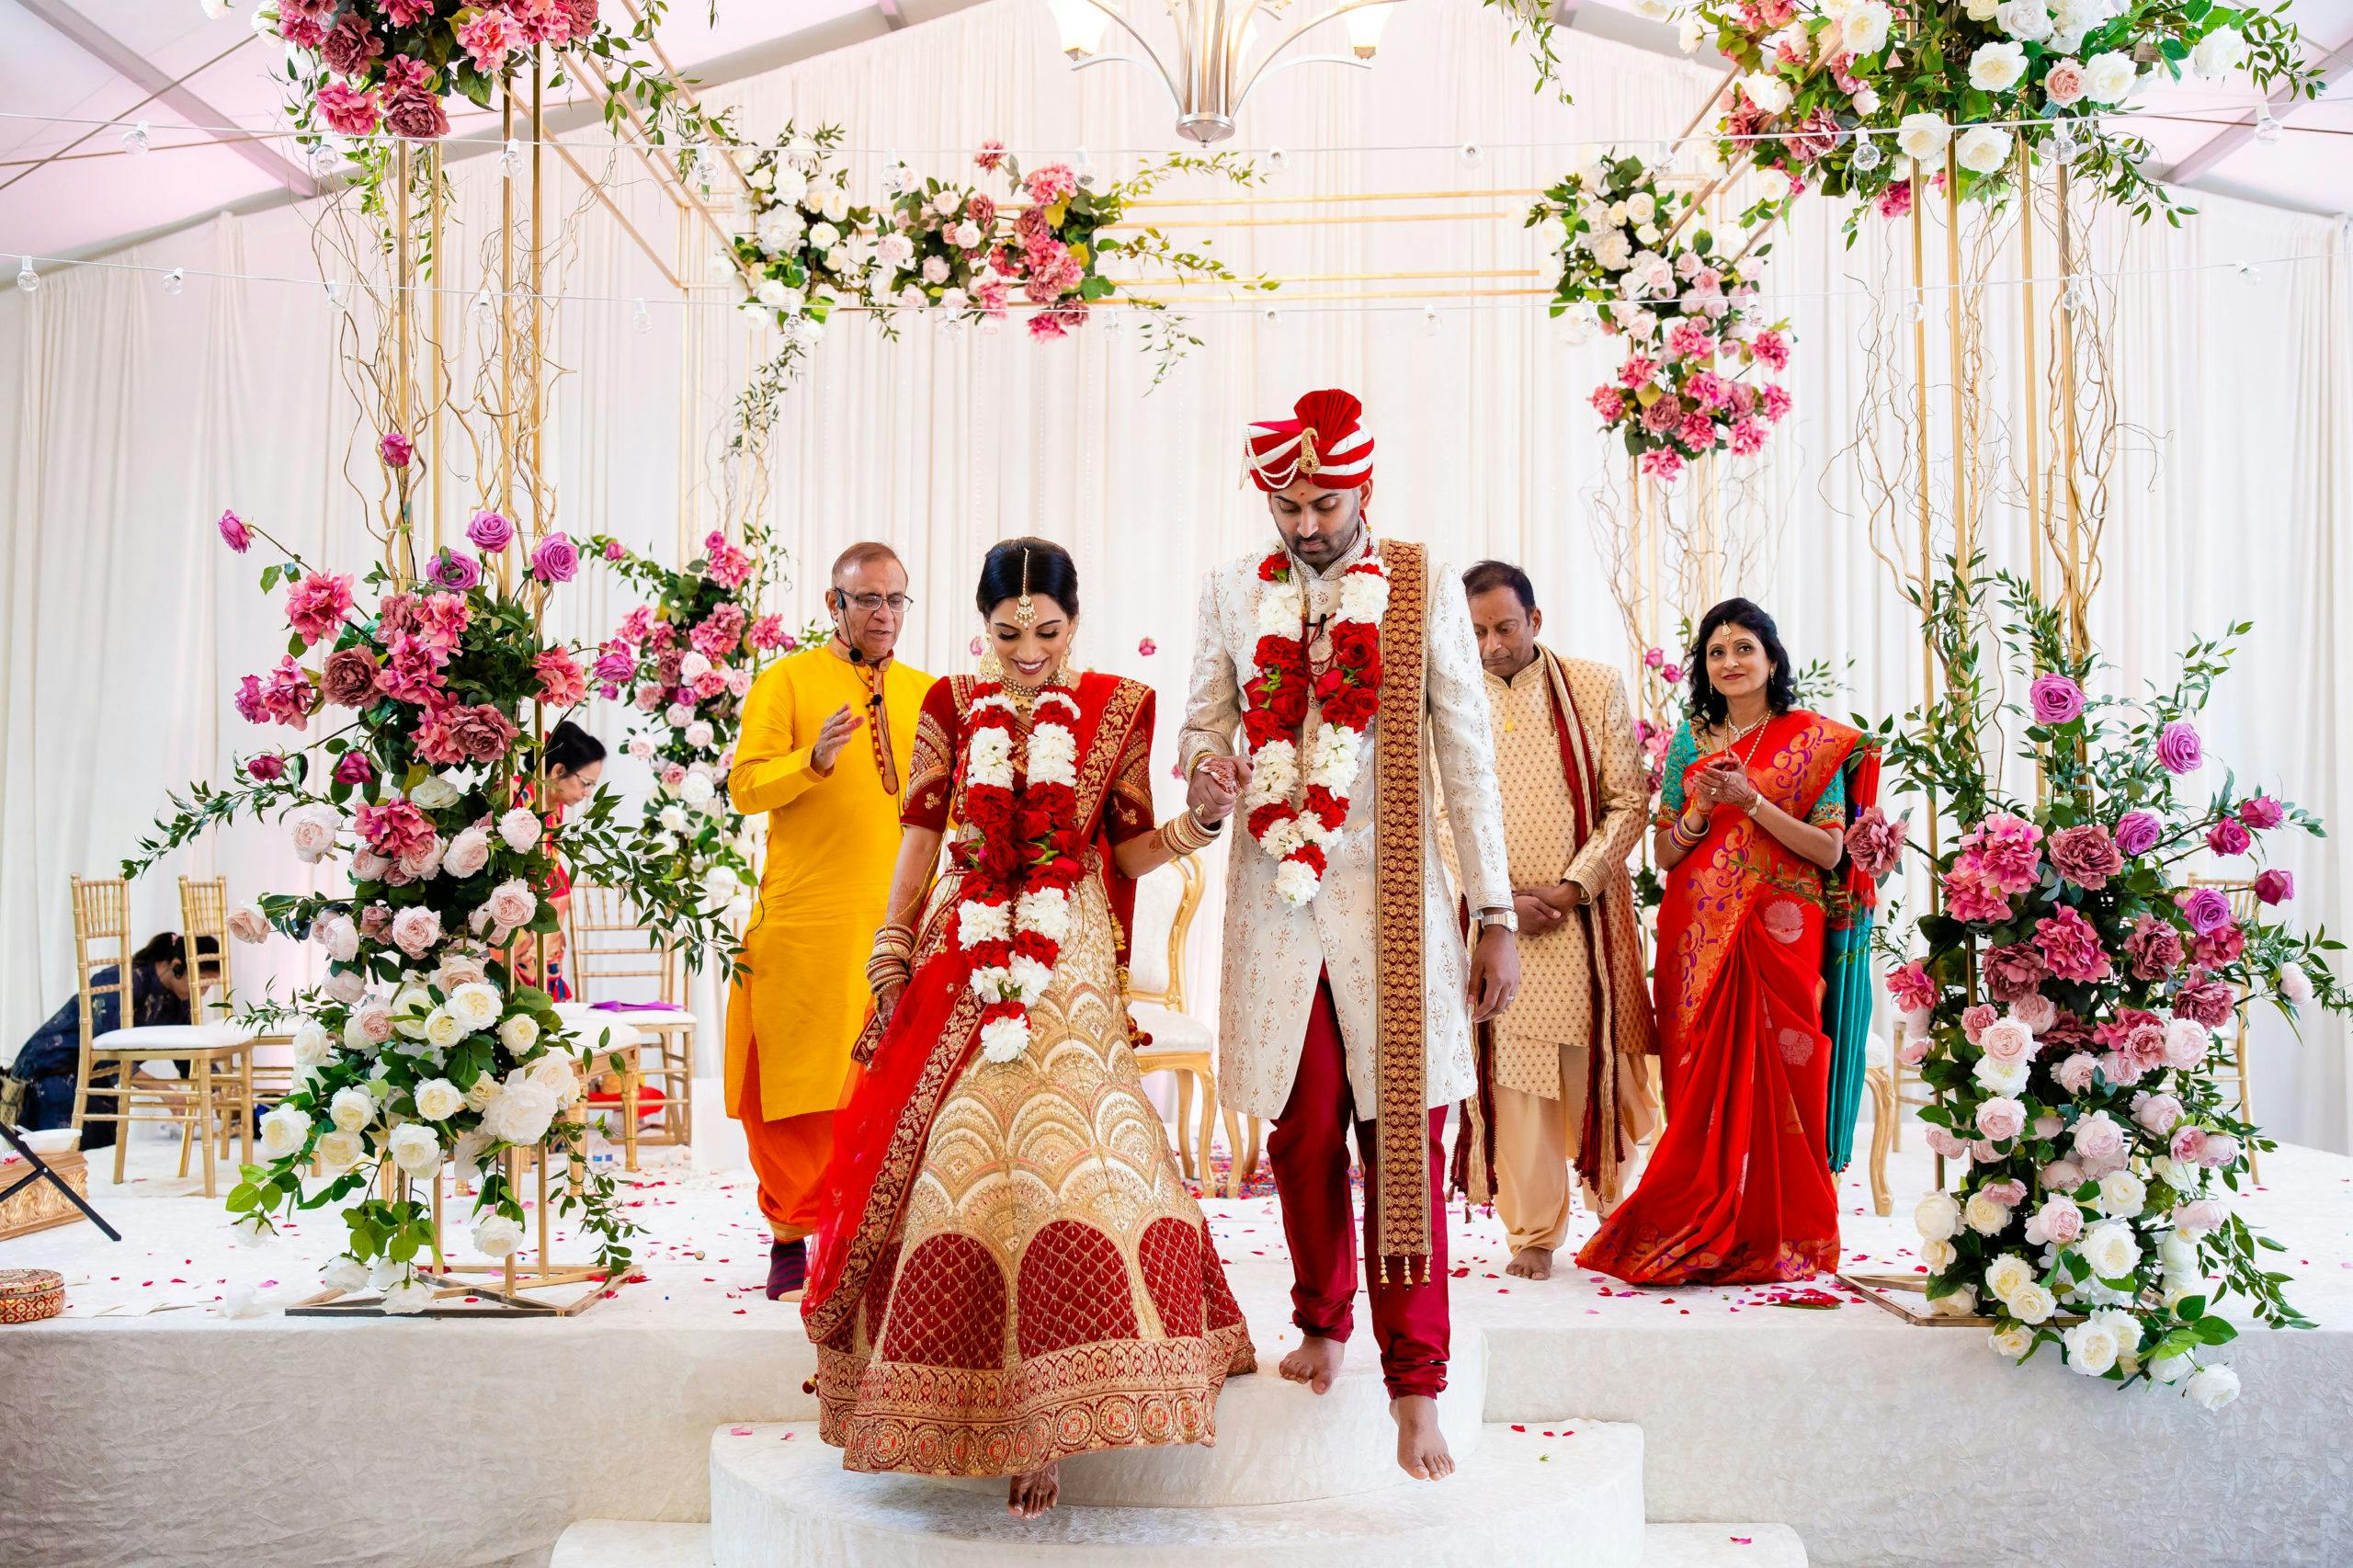 GUIDE ON HOW TO CHOOSE INDIAN WEDDING COLORS – FROM THE WEDDING  PHOTOGRAPHER'S POINT OF VIEW, Indian Wedding Photographers